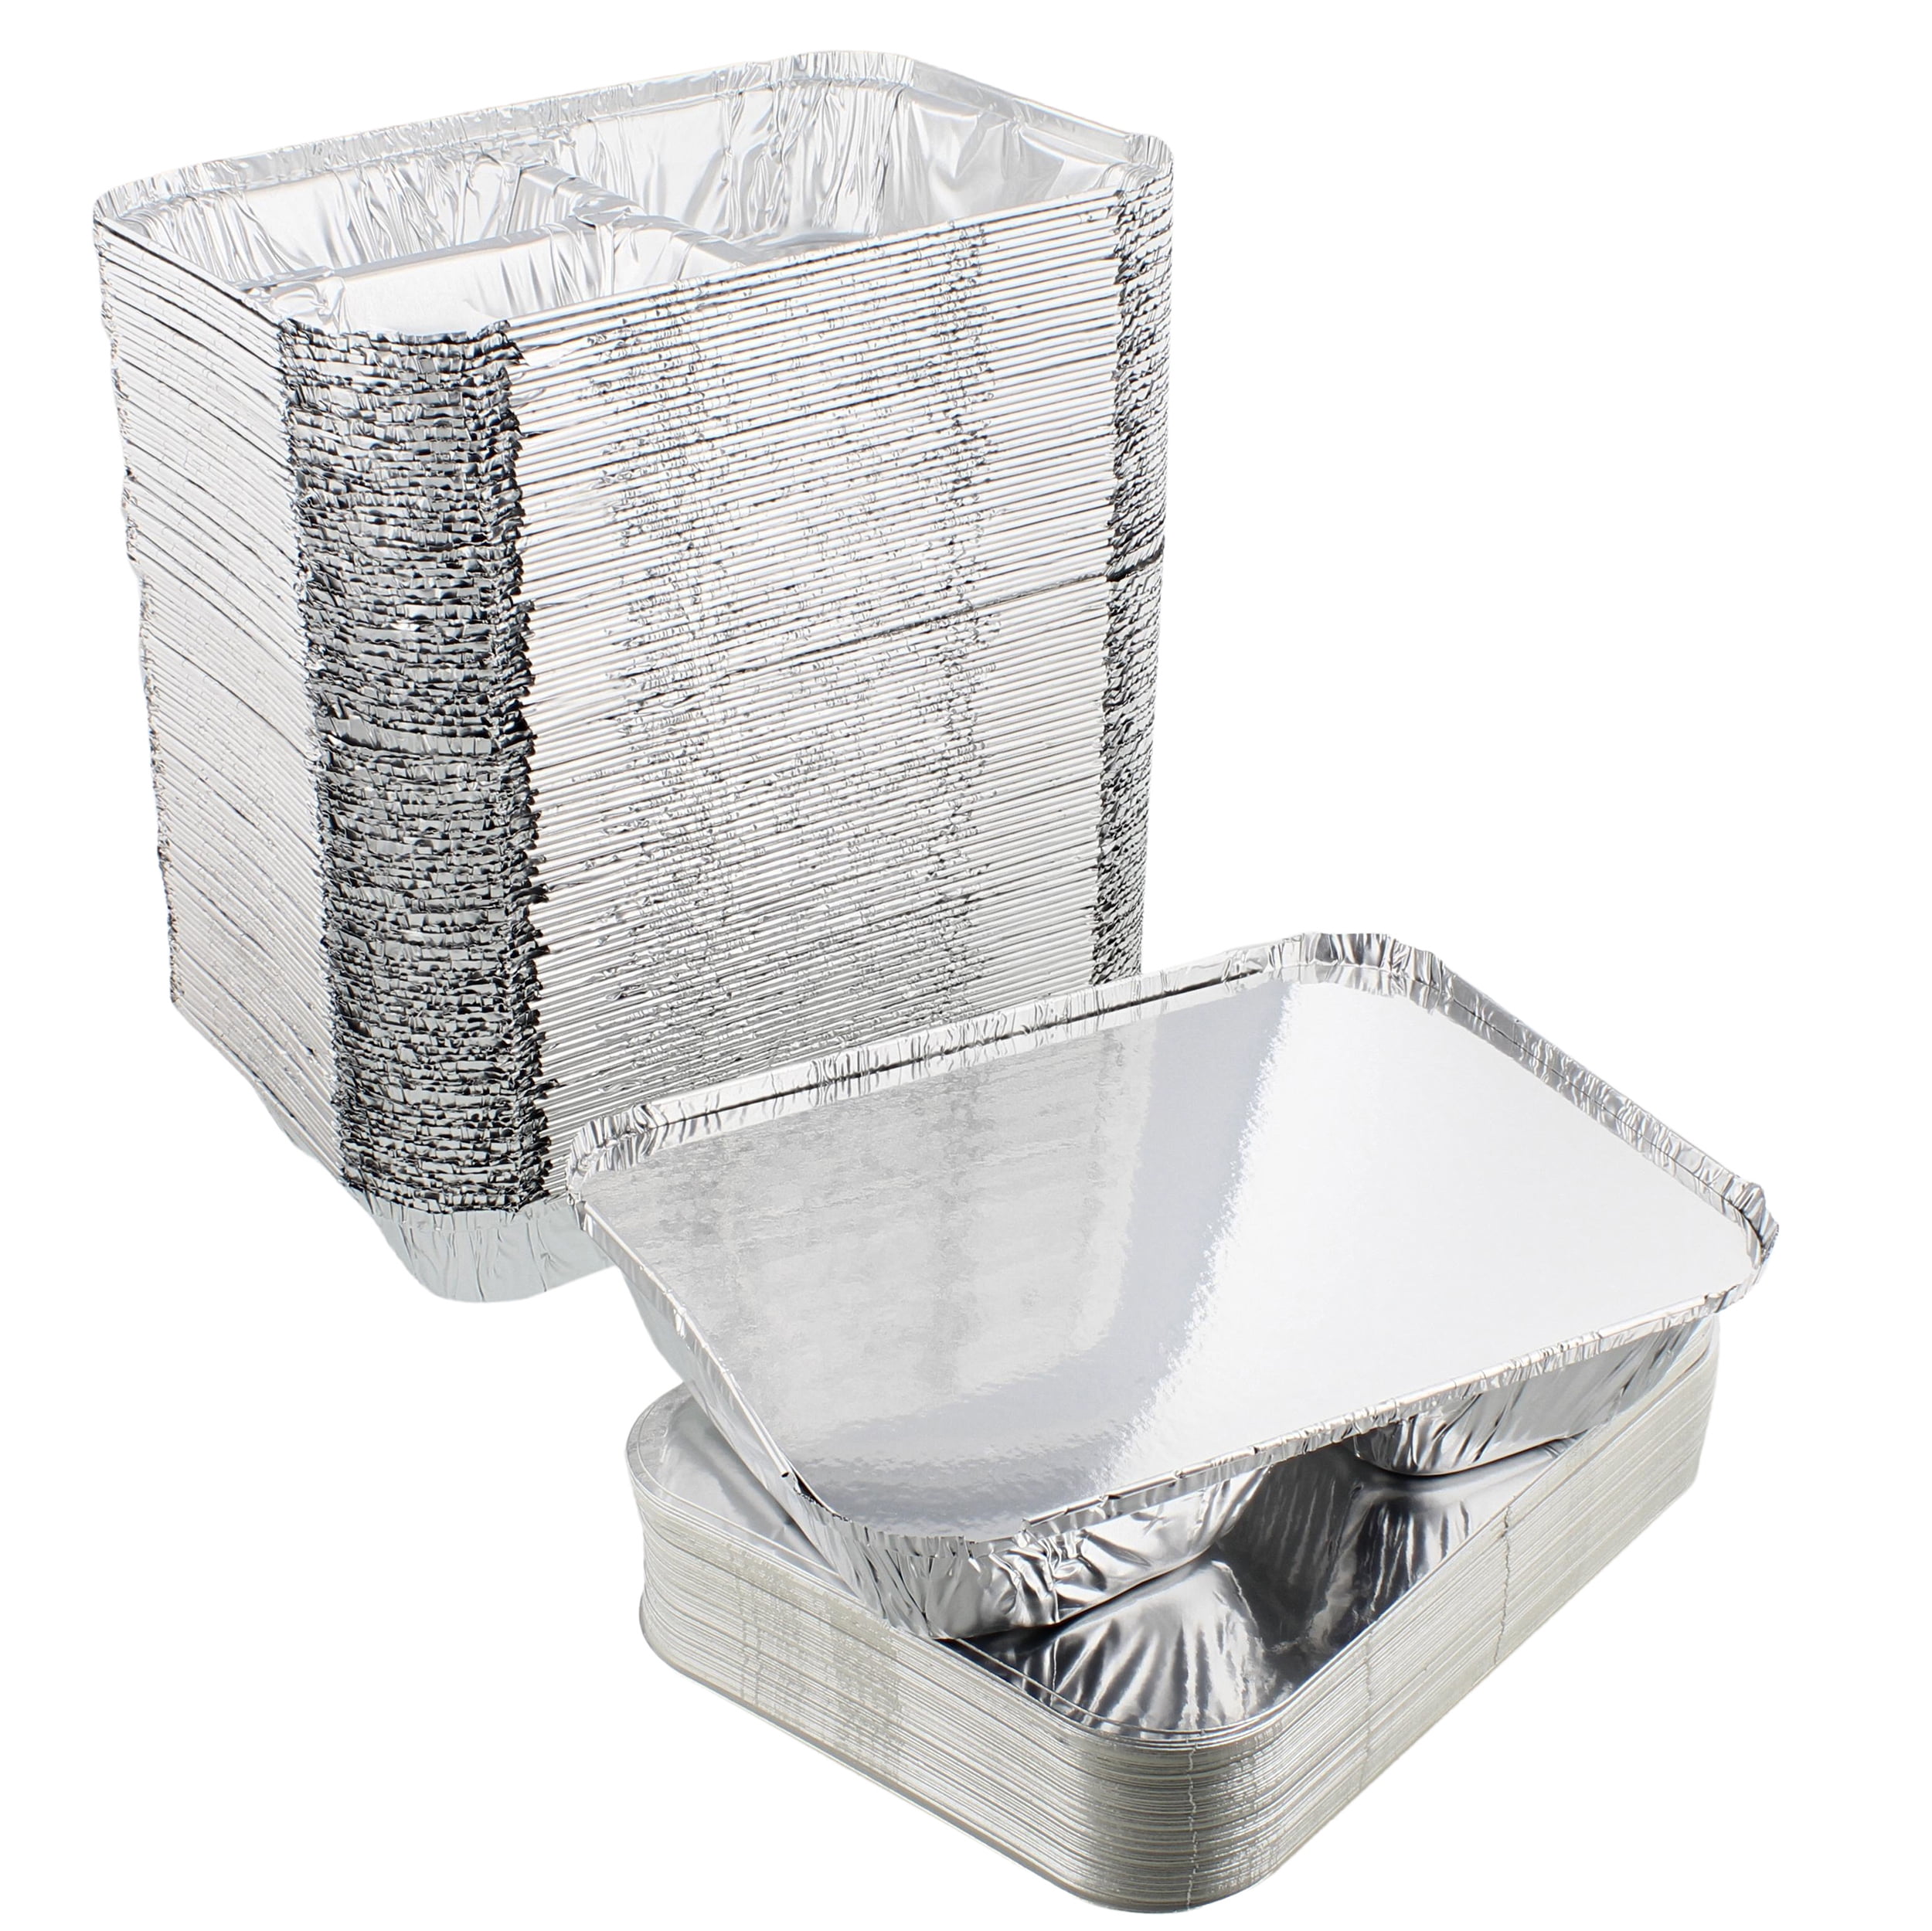 Disposable Foil Pans for Catering Lot45 Aluminum Catering Pan 8 x 8in 50pk 